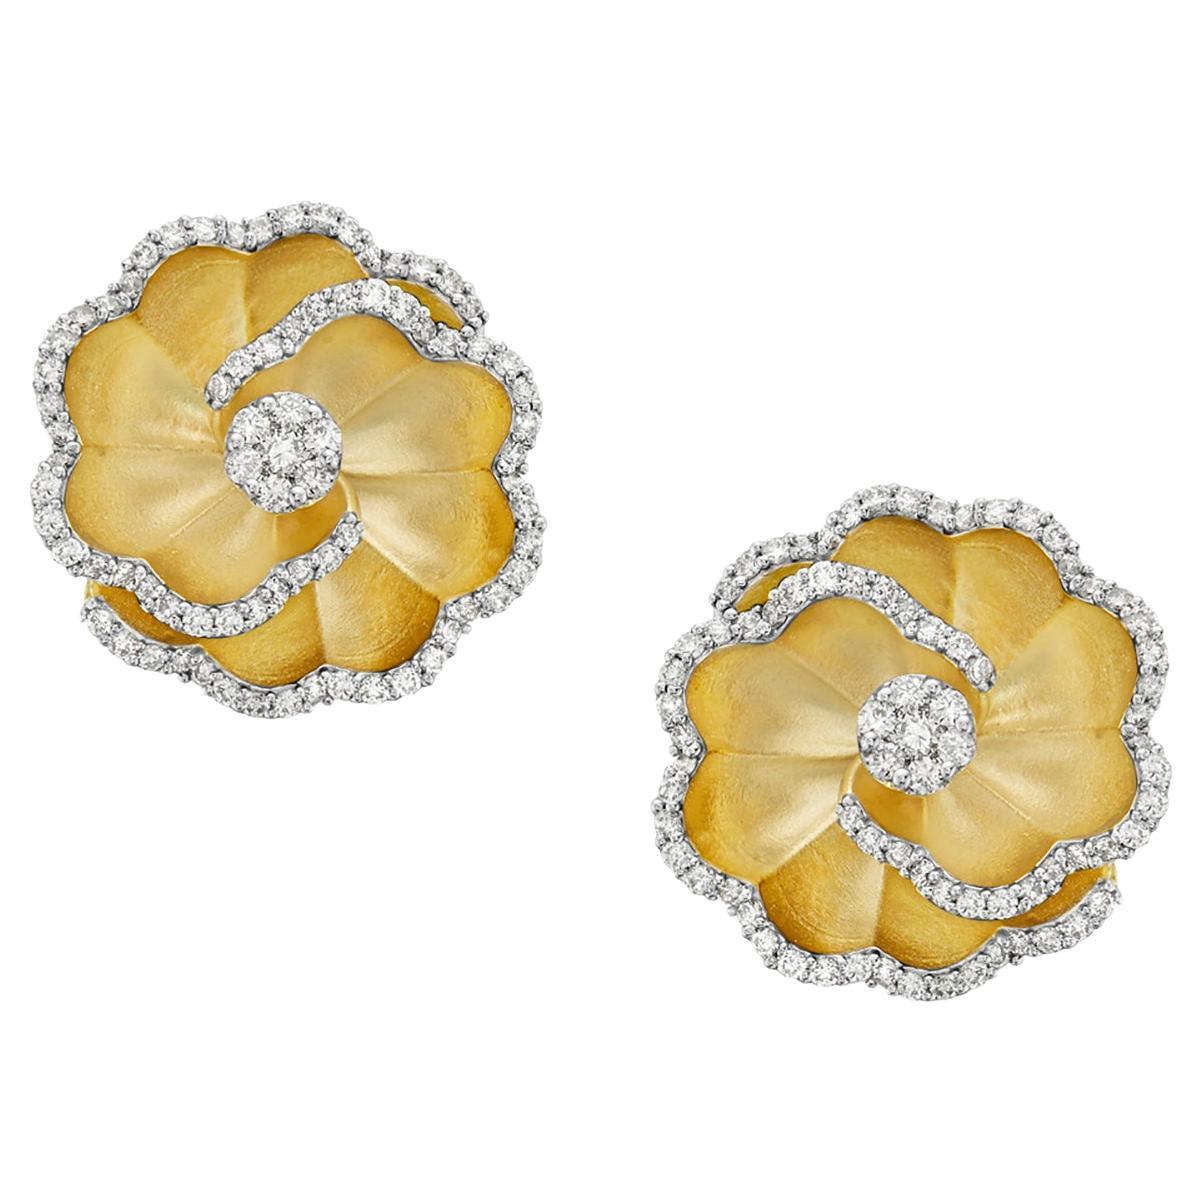 Carved Flower Shaped Earrings Accented with Diamonds Made in 14k Yellow Gold For Sale